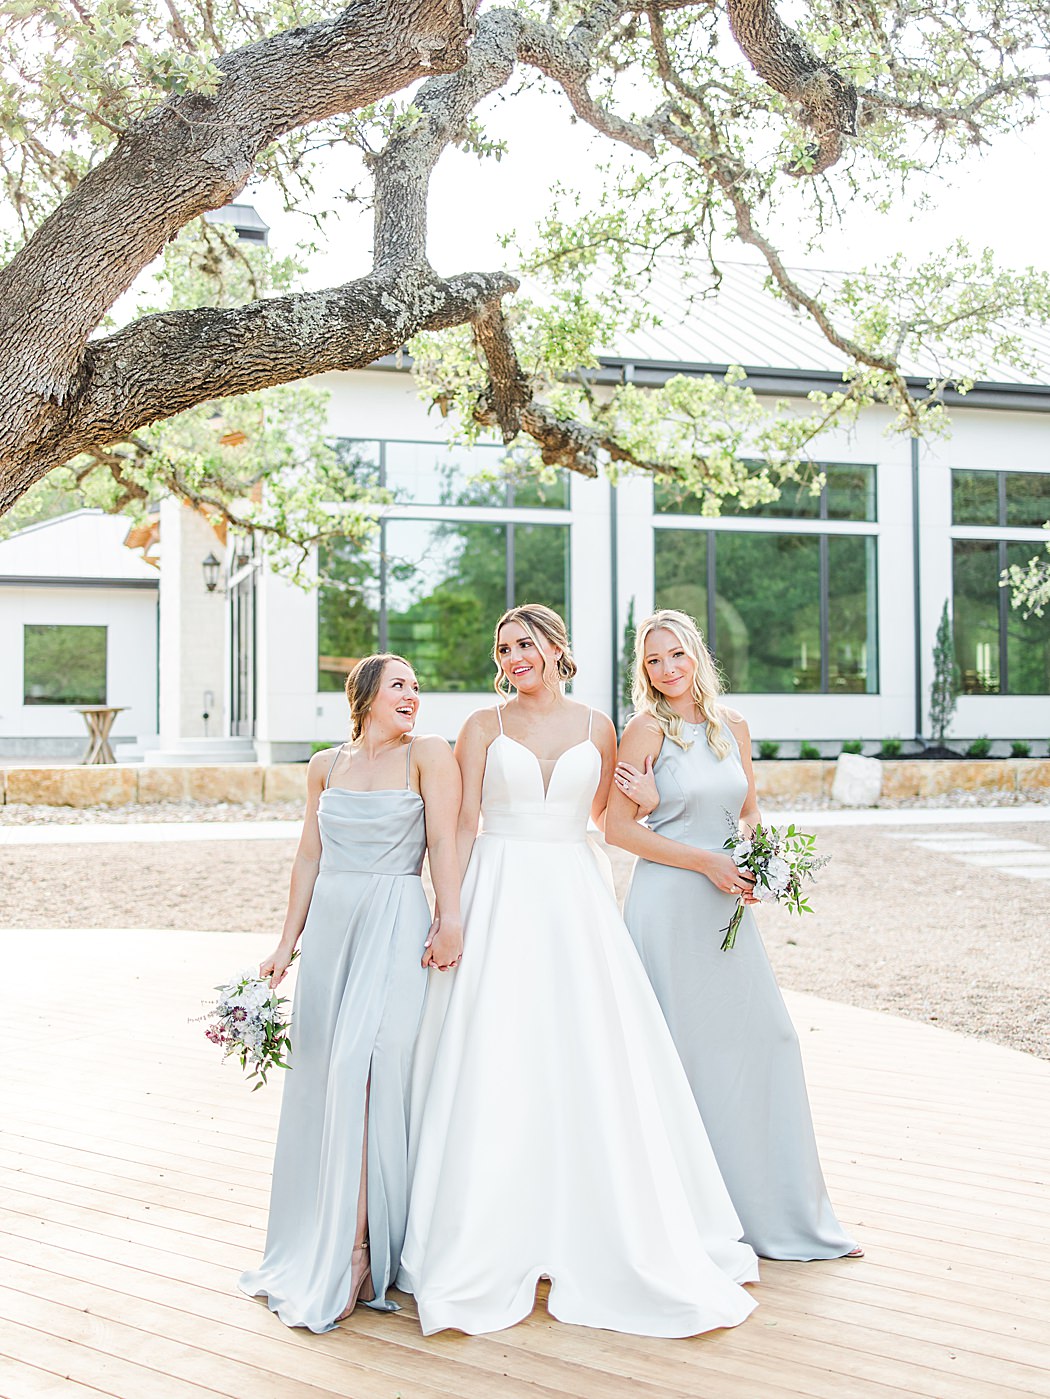 The Preserve at Canyon Lake Photos by Allison Jeffers Wedding Photography 0075